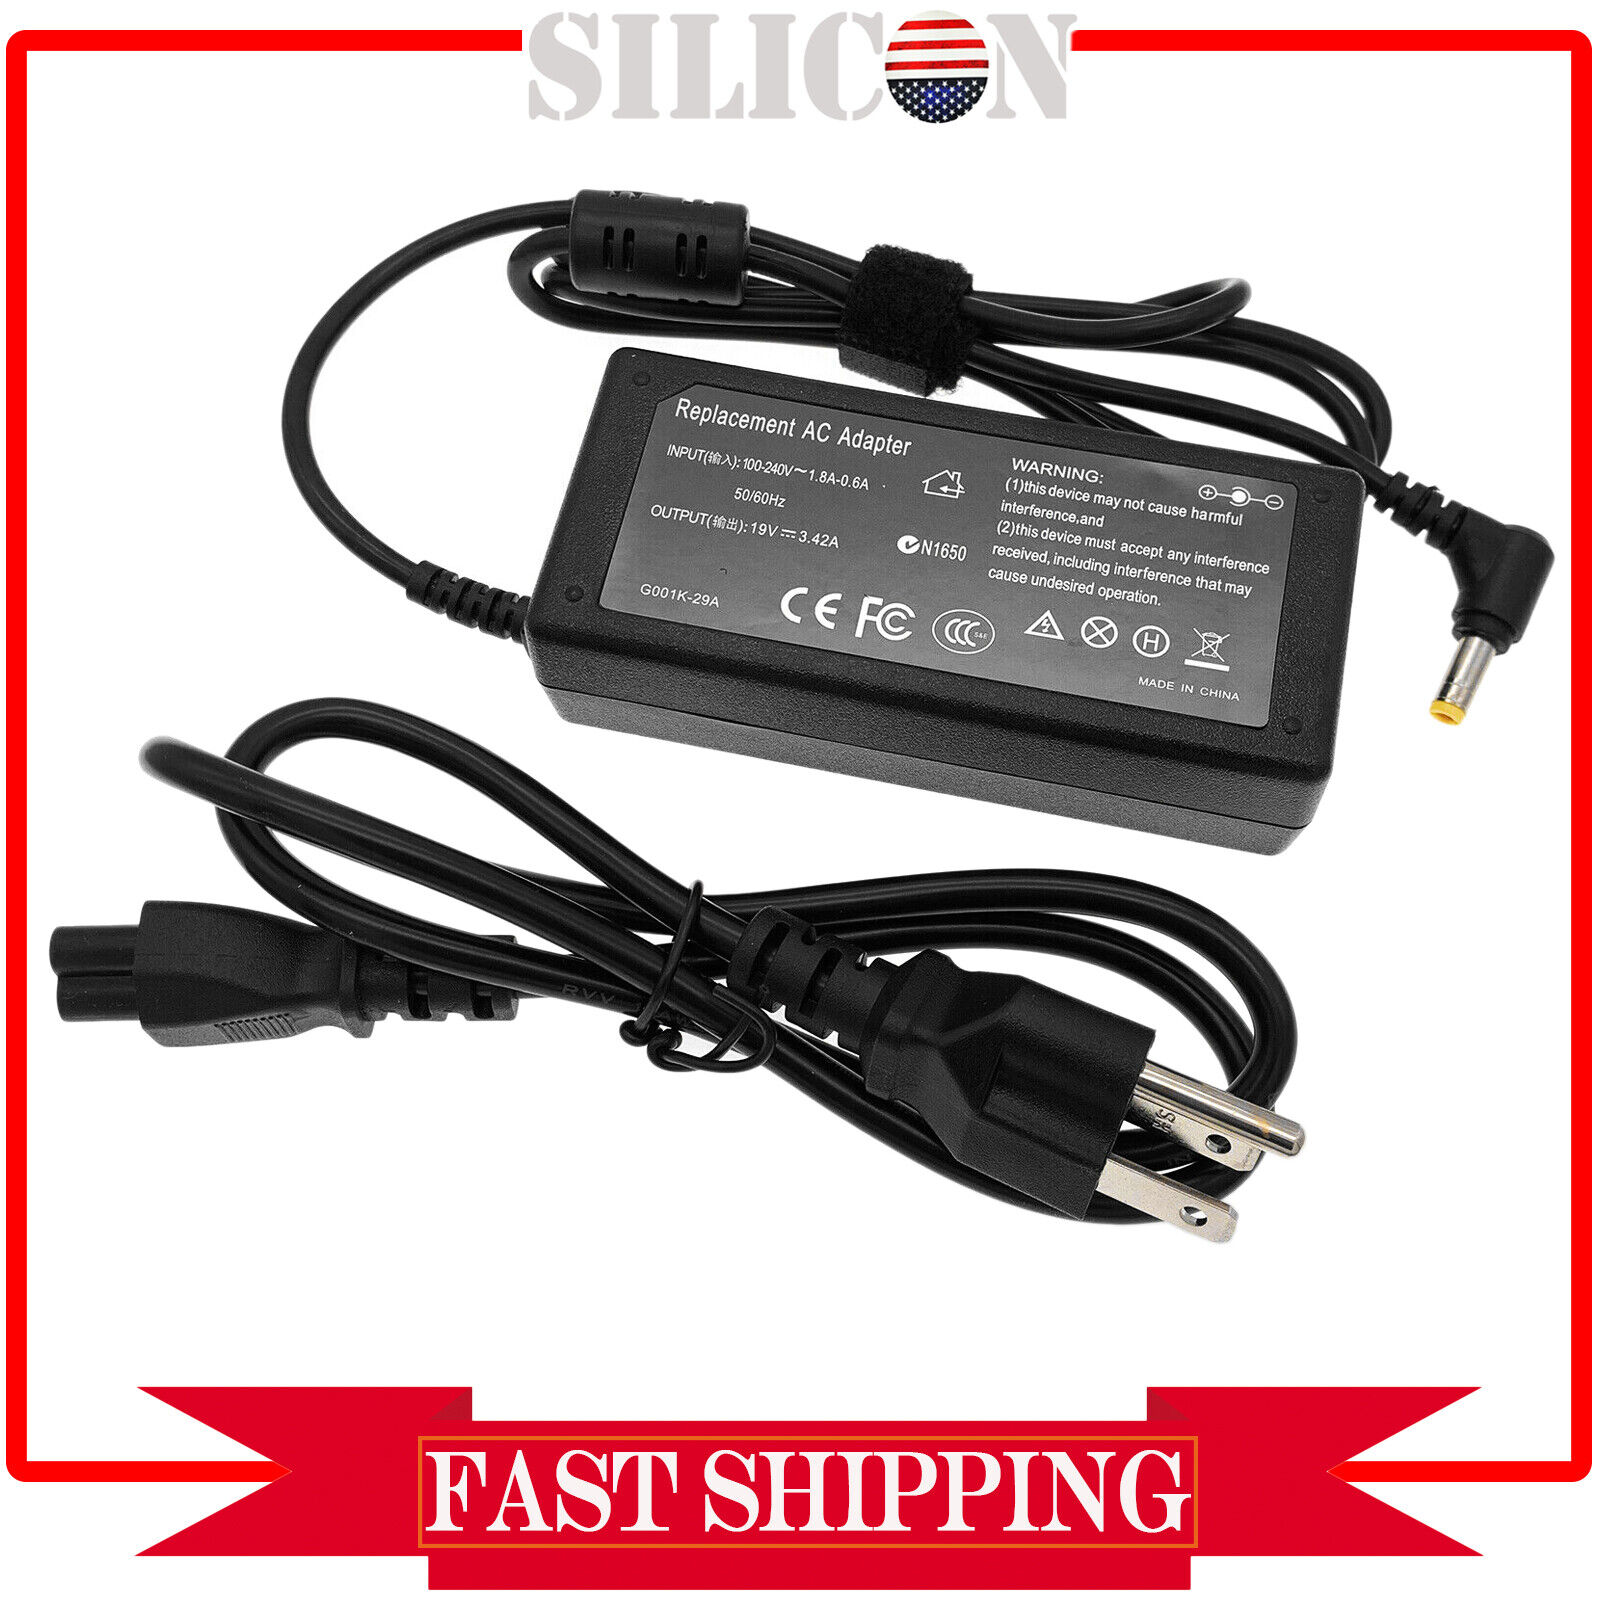 New 19V 3.42A 65W AC Adapter Charger For Toshiba Laptop Power Supply Cord Cable